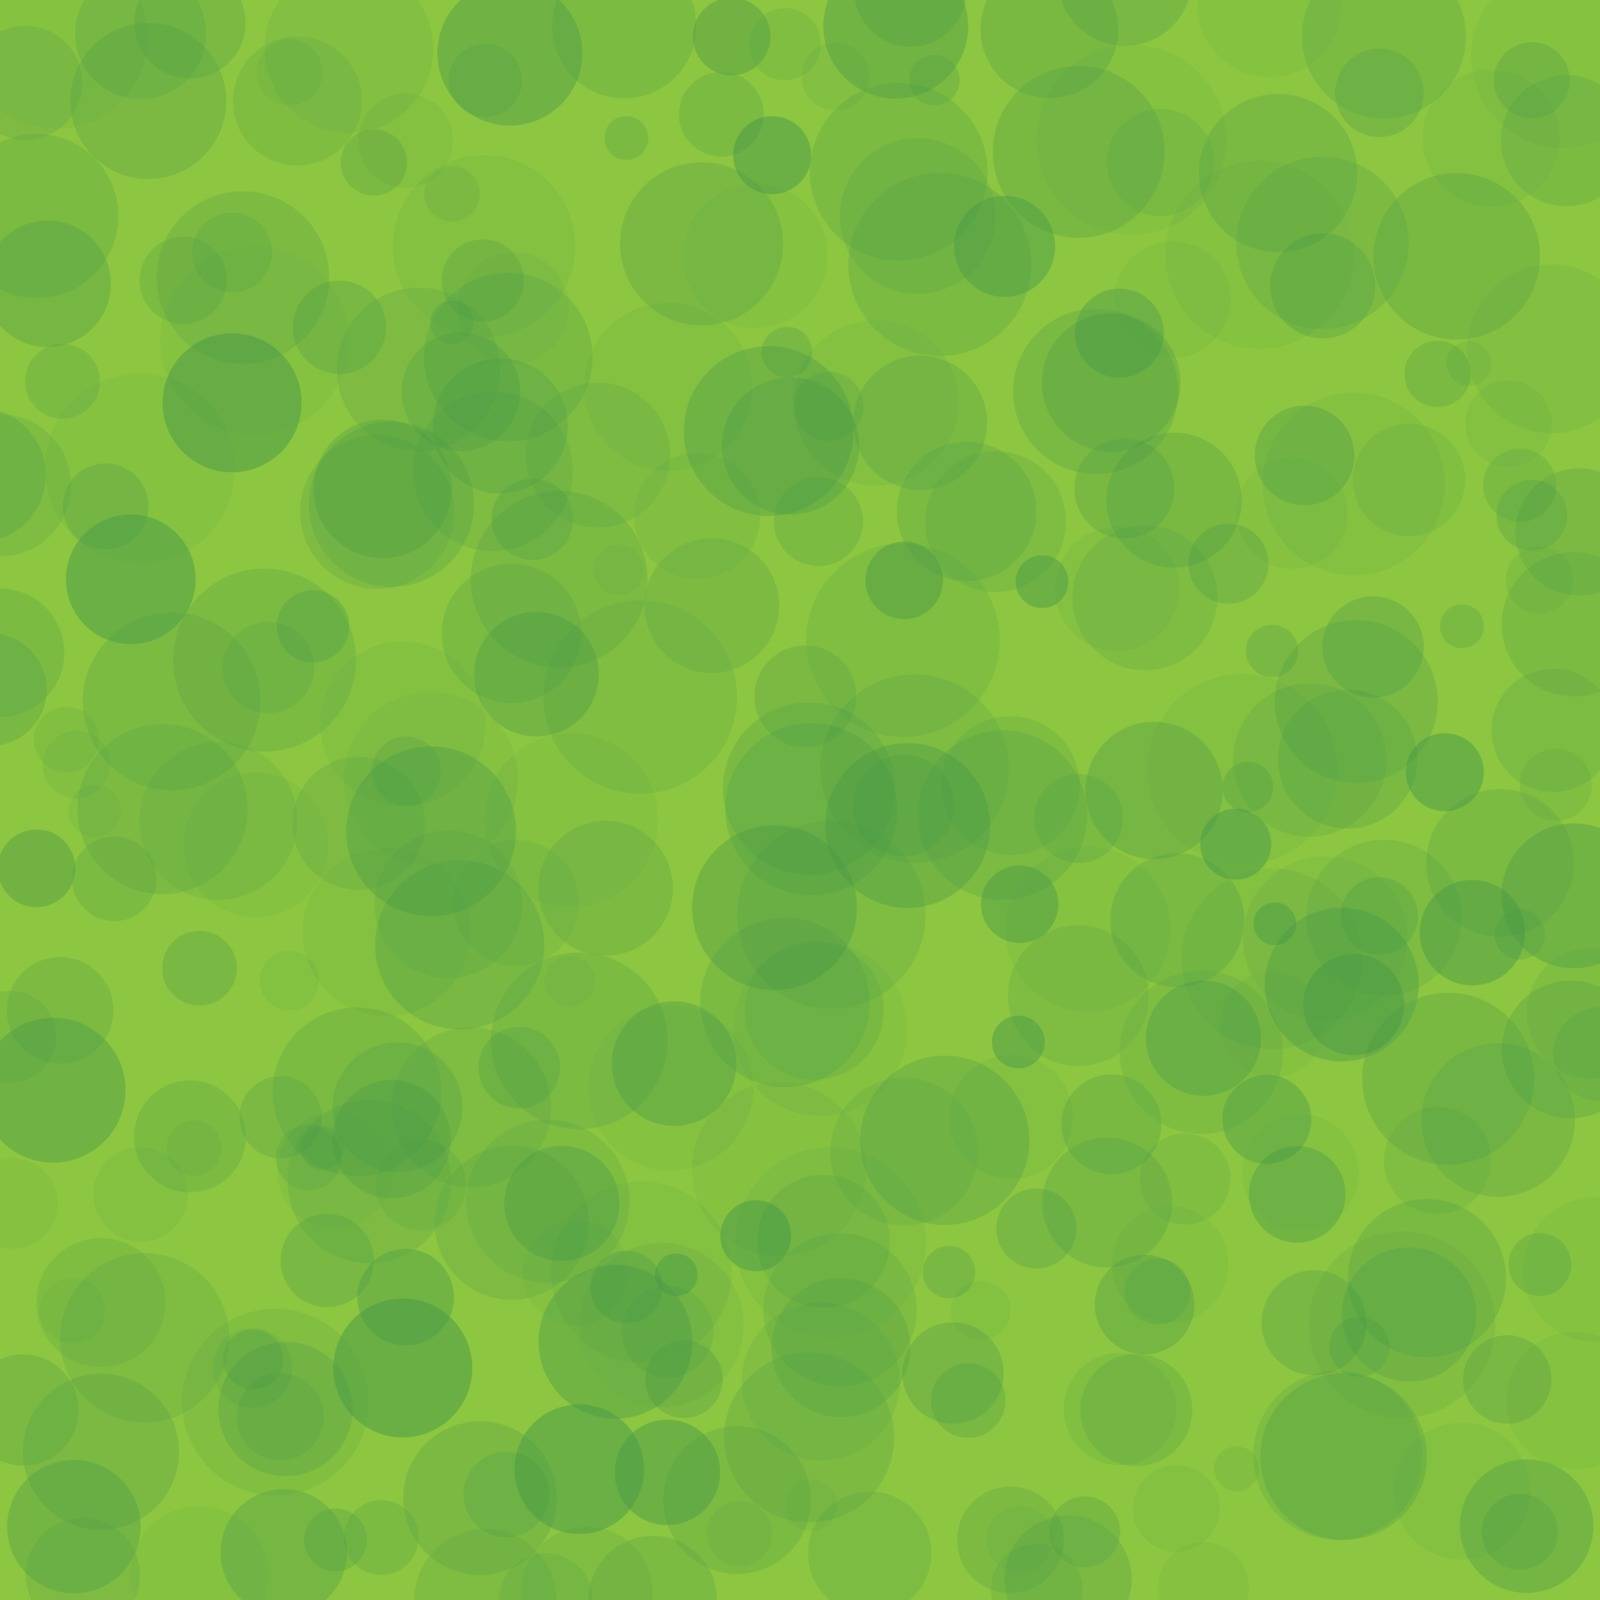 Green clean bubble background pattern